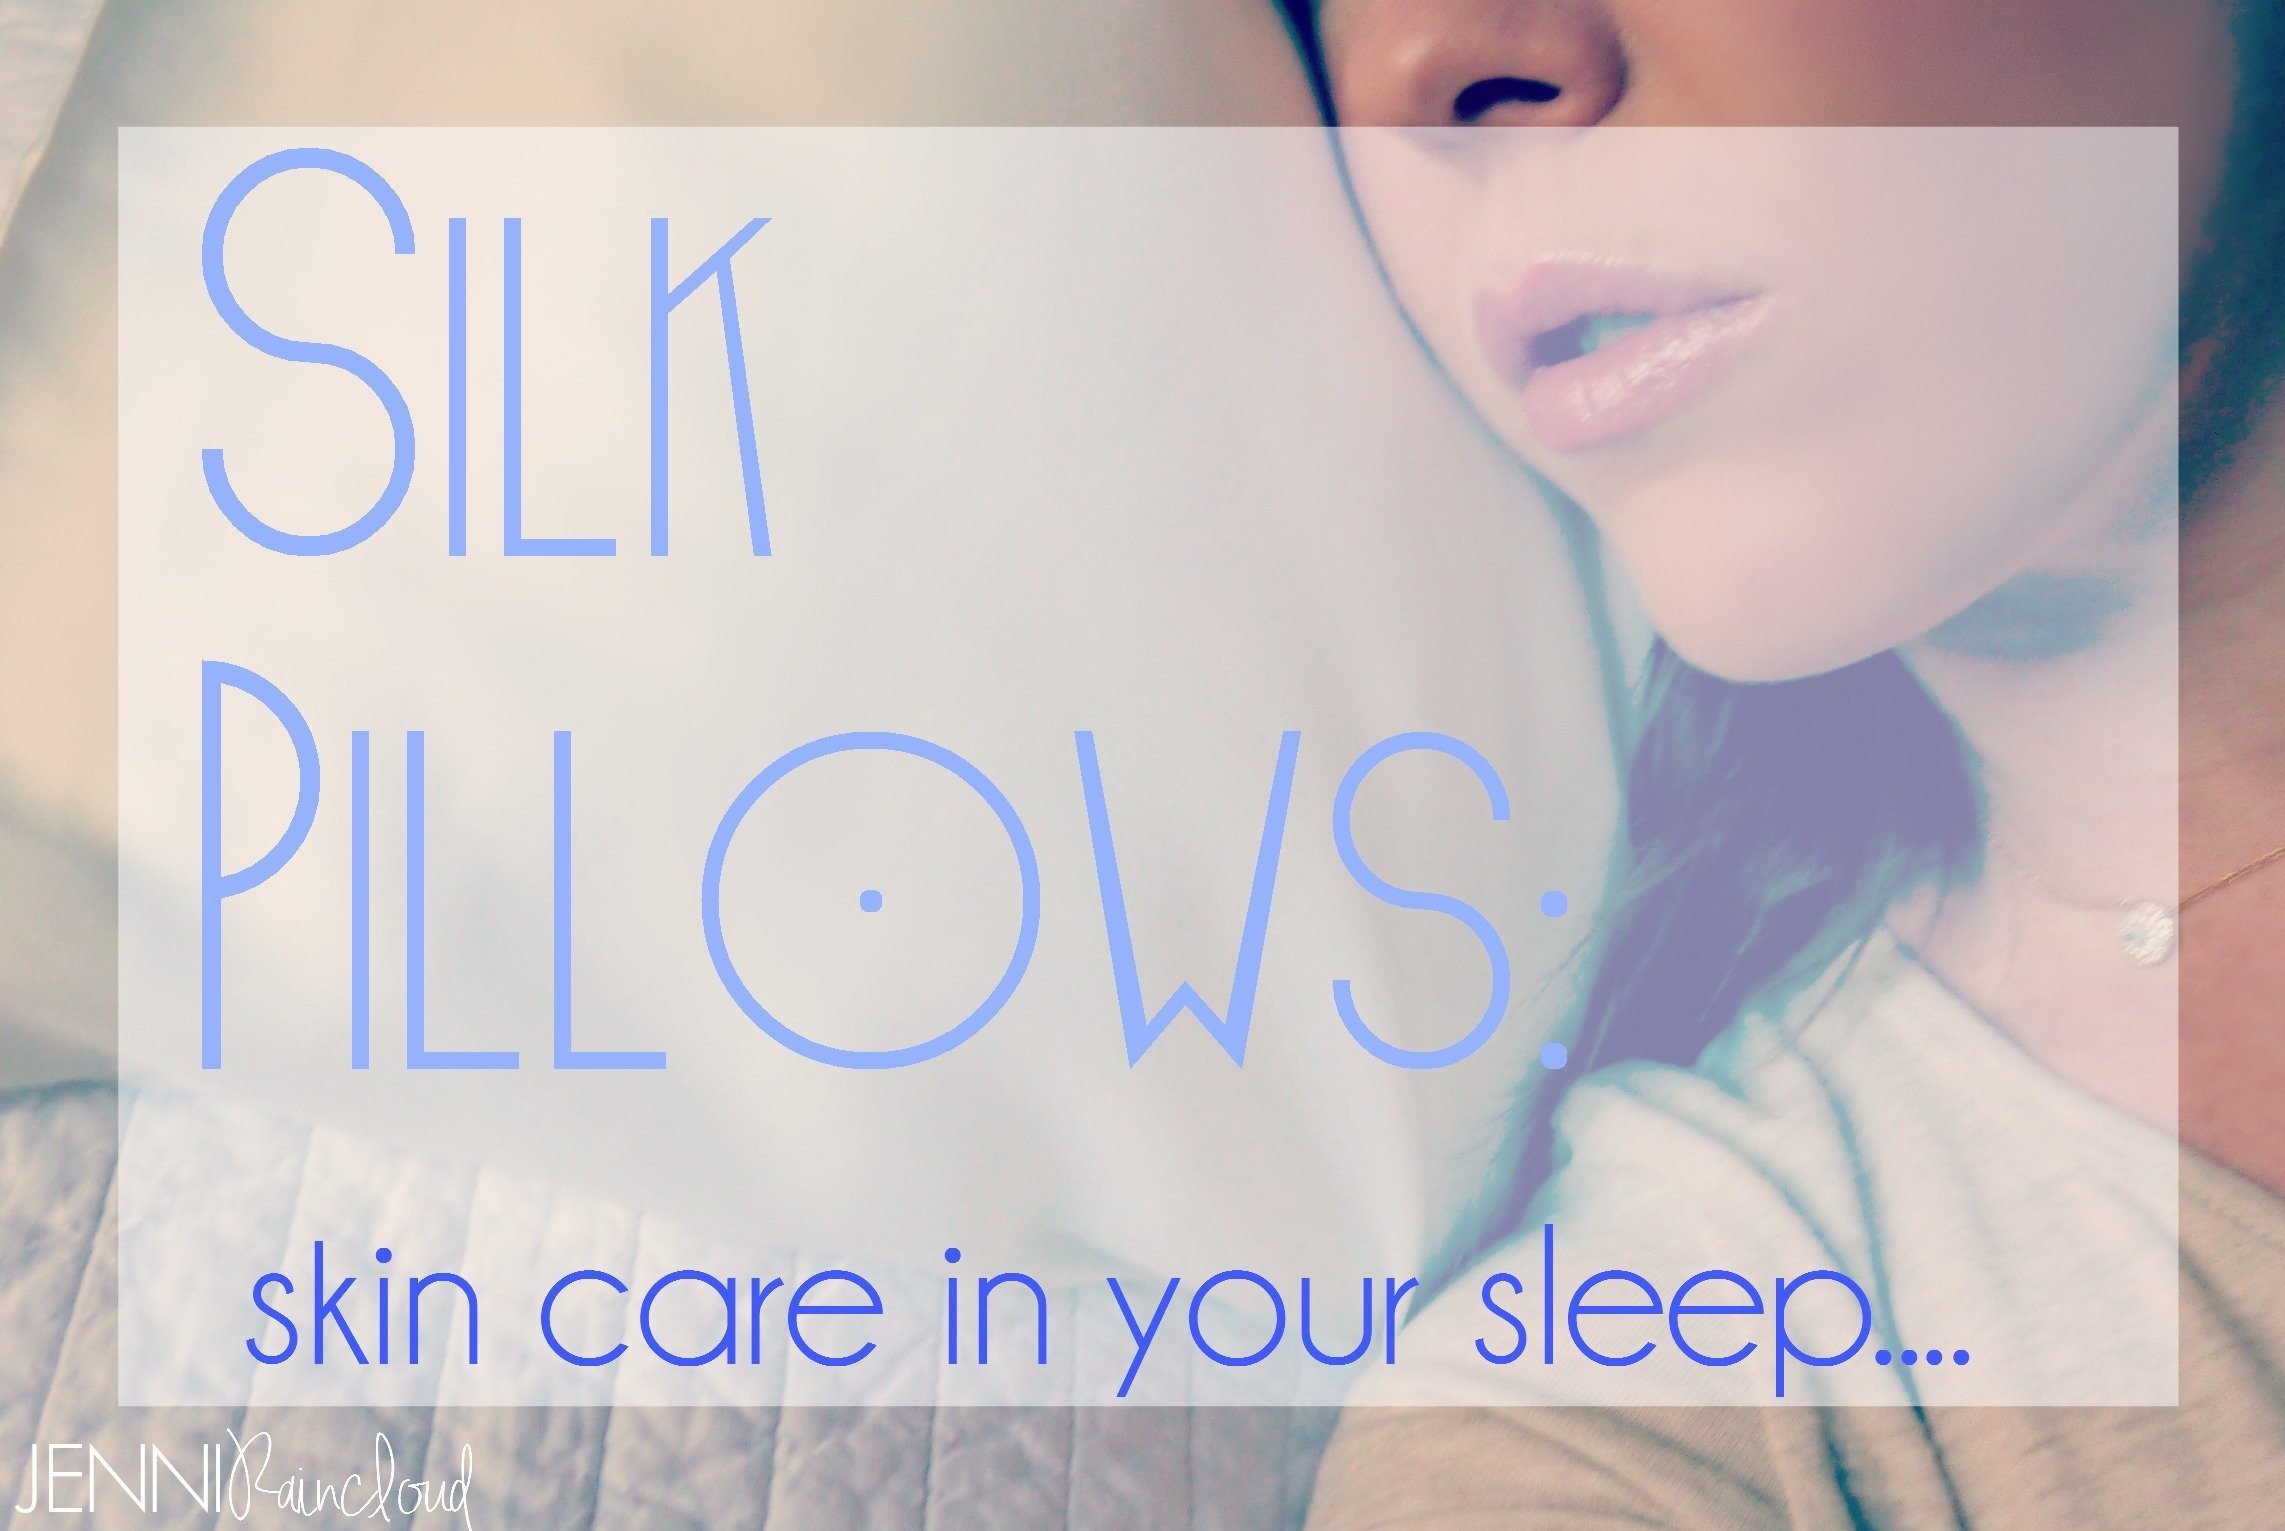 Skin Care and Silk Pillows